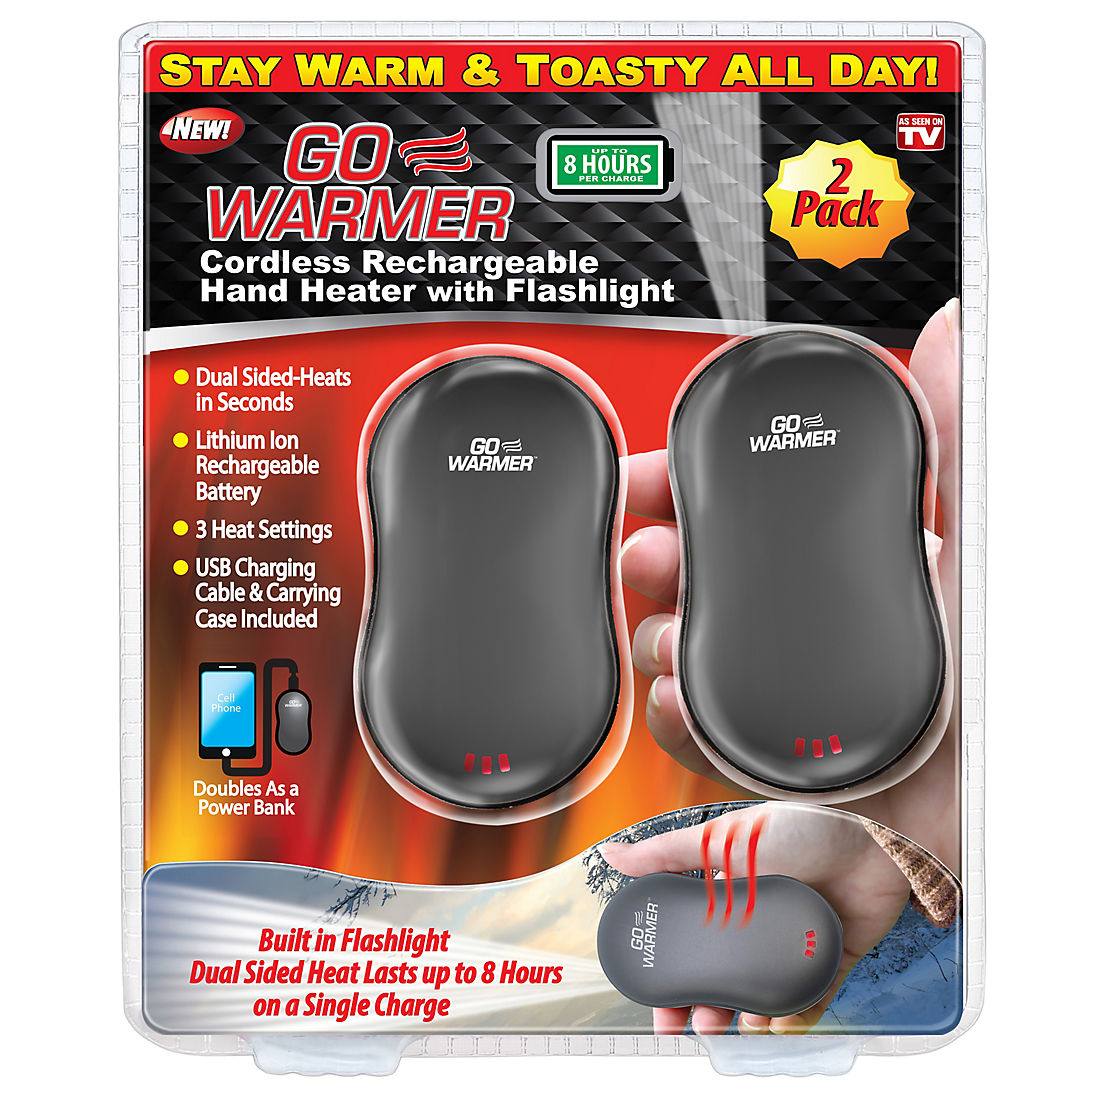 Go Warmer Cordless Rechargeable Hand Heater up to 8hrs and Power Bank for sale online 